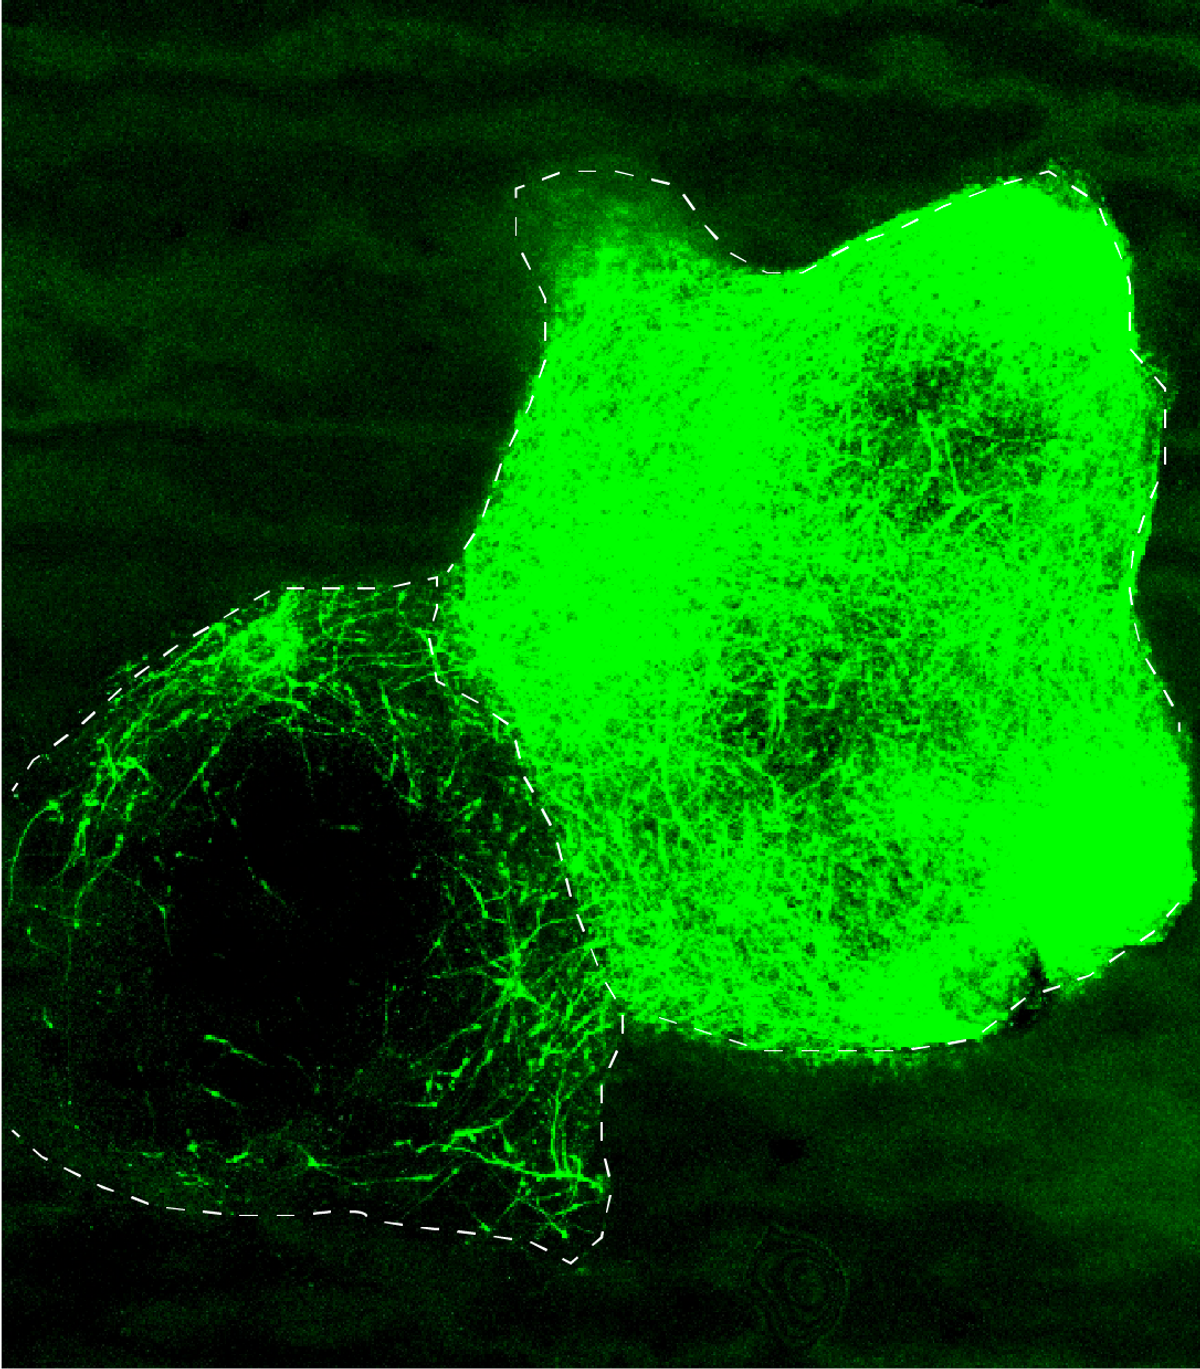 Fluorescent image of interneurons, shown in green color, migrating from one blob-like structure into another.